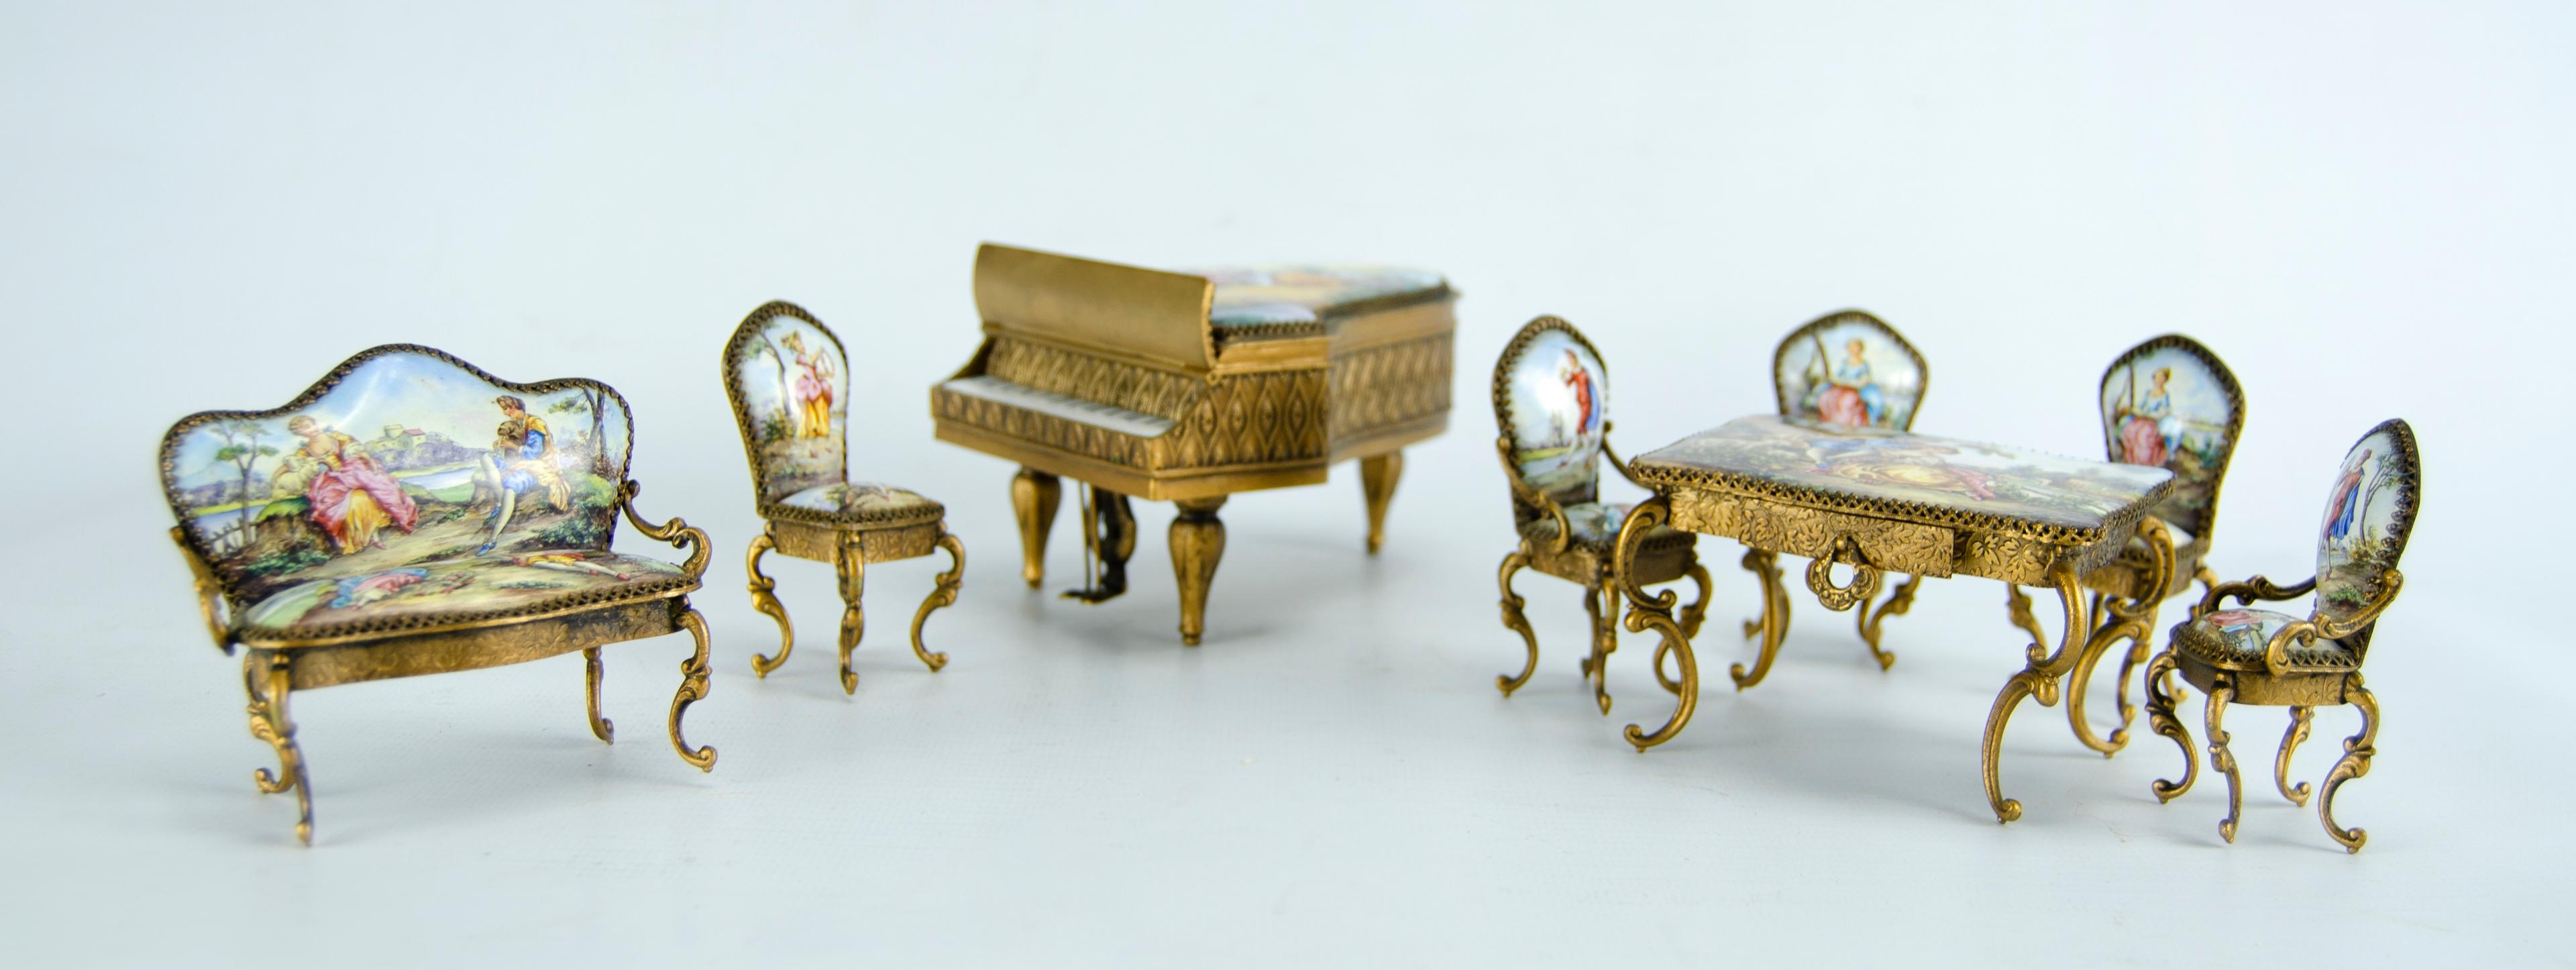 Enamel miniatures living room and piano set
Origin Vienna, Austria Circa 1900
Enamel and bronze materials
The piano is a music box (it works)
The general condition is very good. only the table has a chip at an angle
Measurements: Height wide